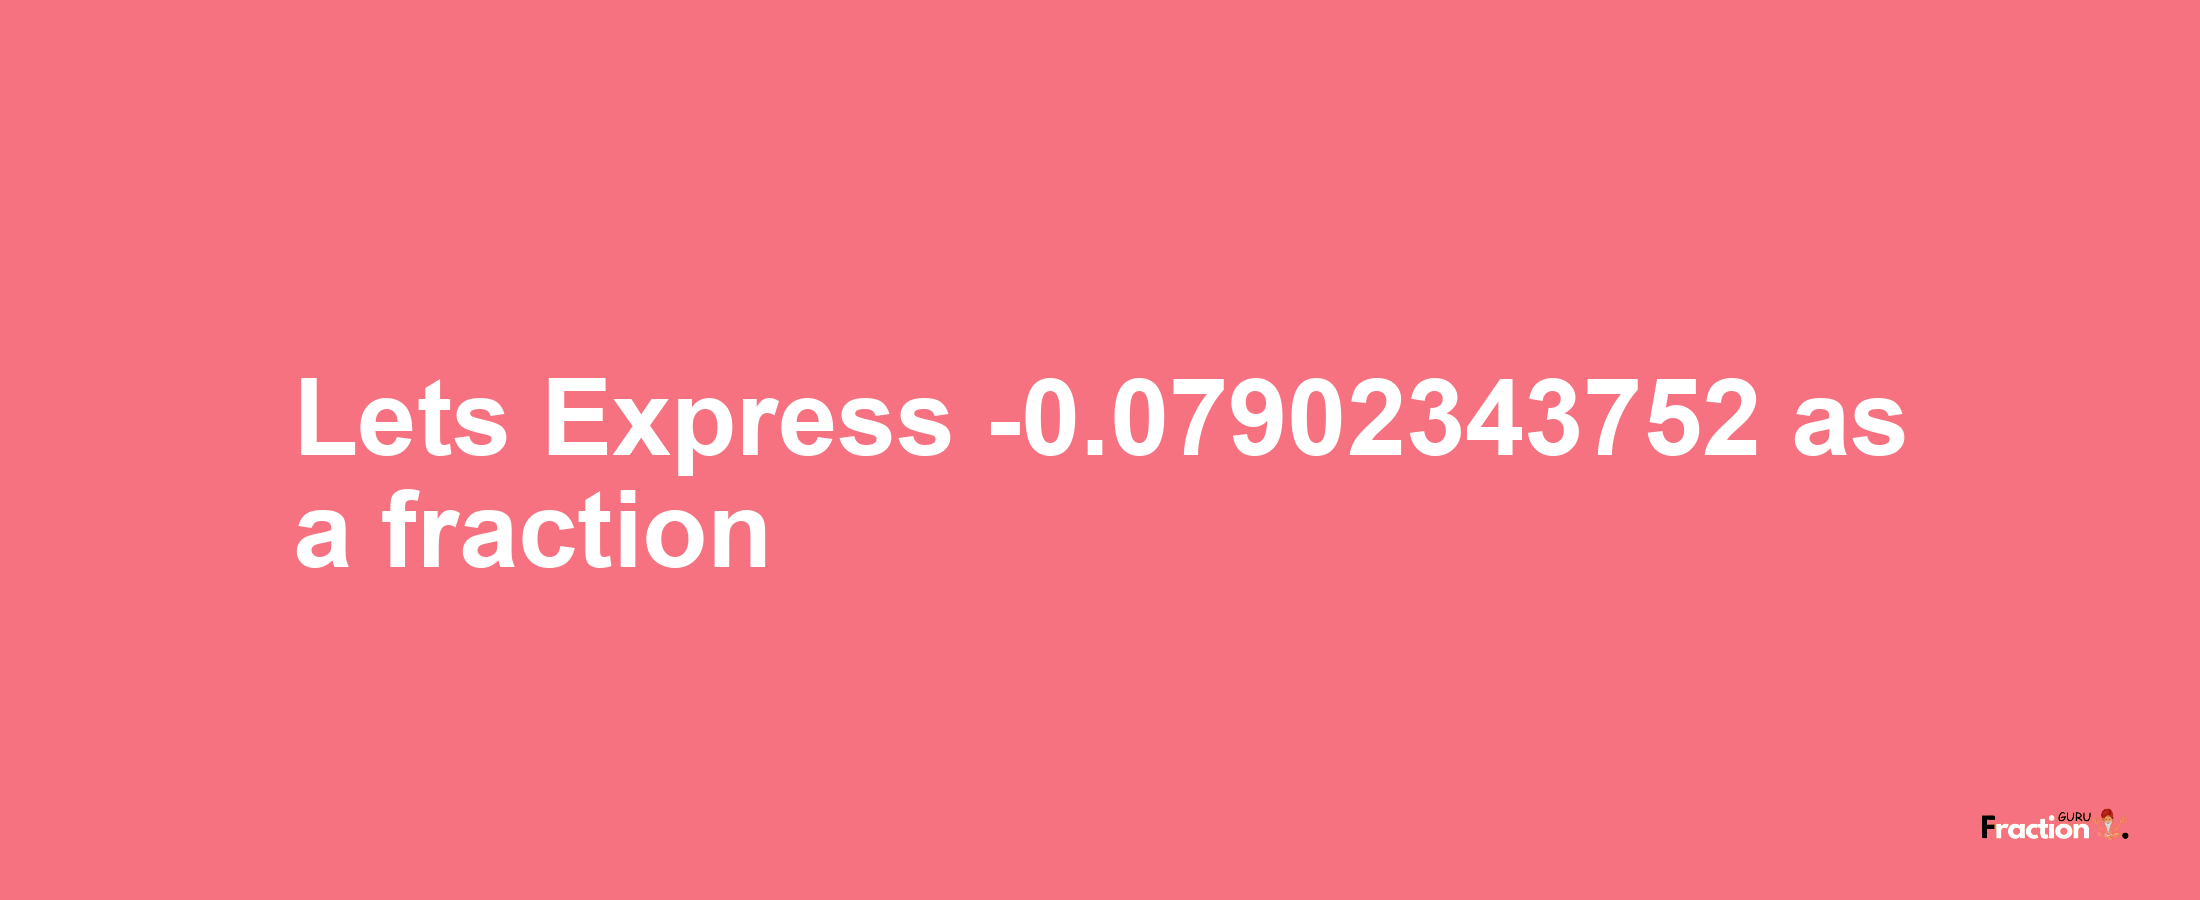 Lets Express -0.07902343752 as afraction